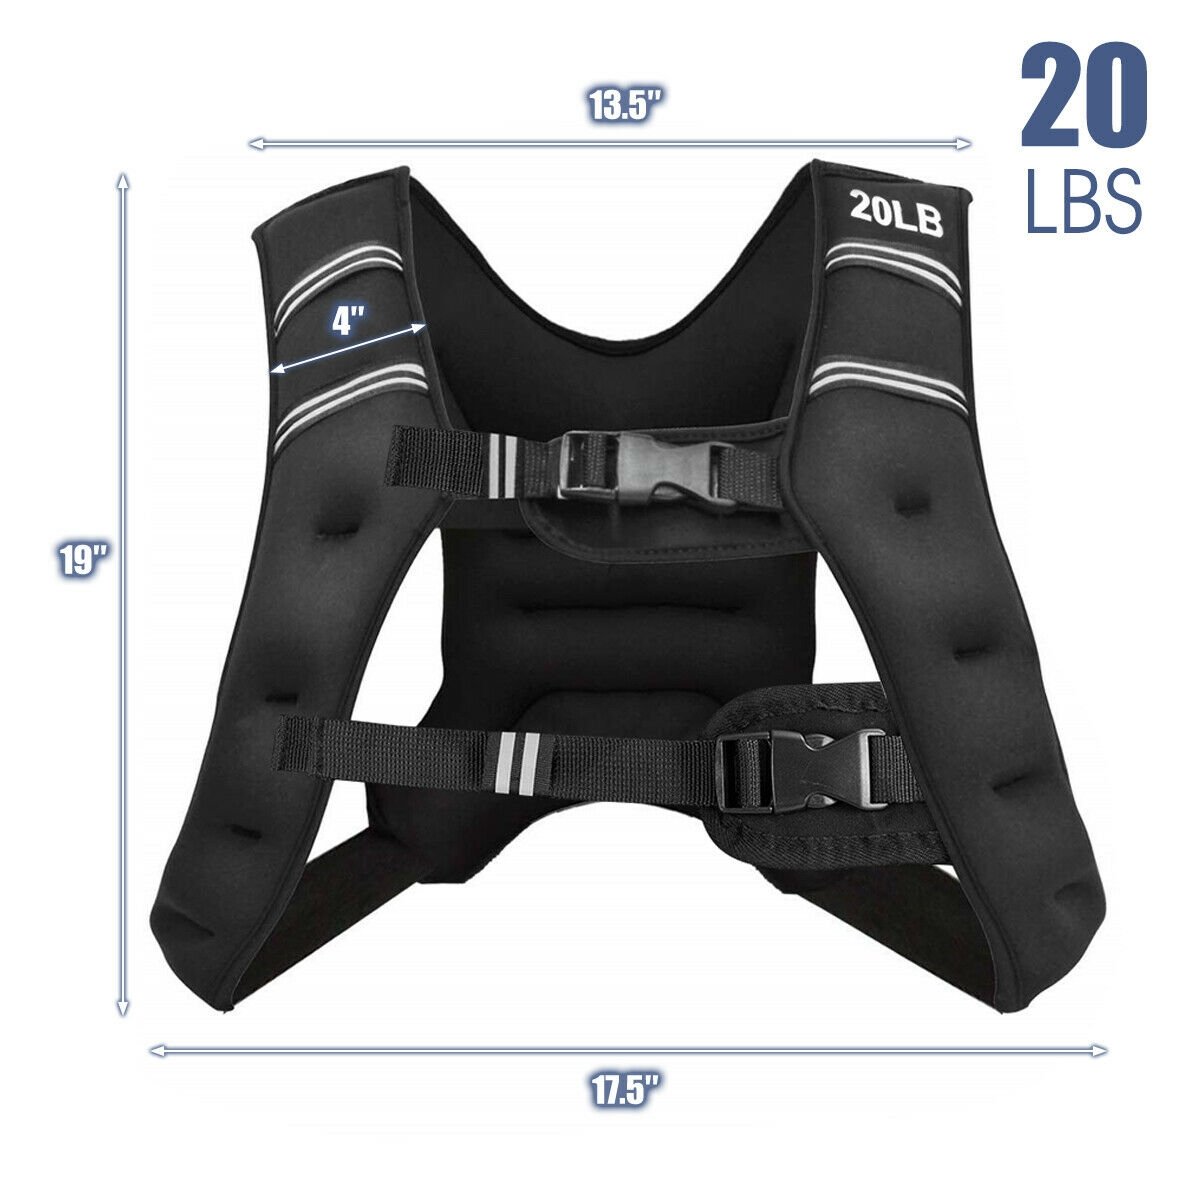 Training Weight Vest Workout Equipment with Adjustable Buckles and Mesh Bag-20 lbs, Black at Gallery Canada